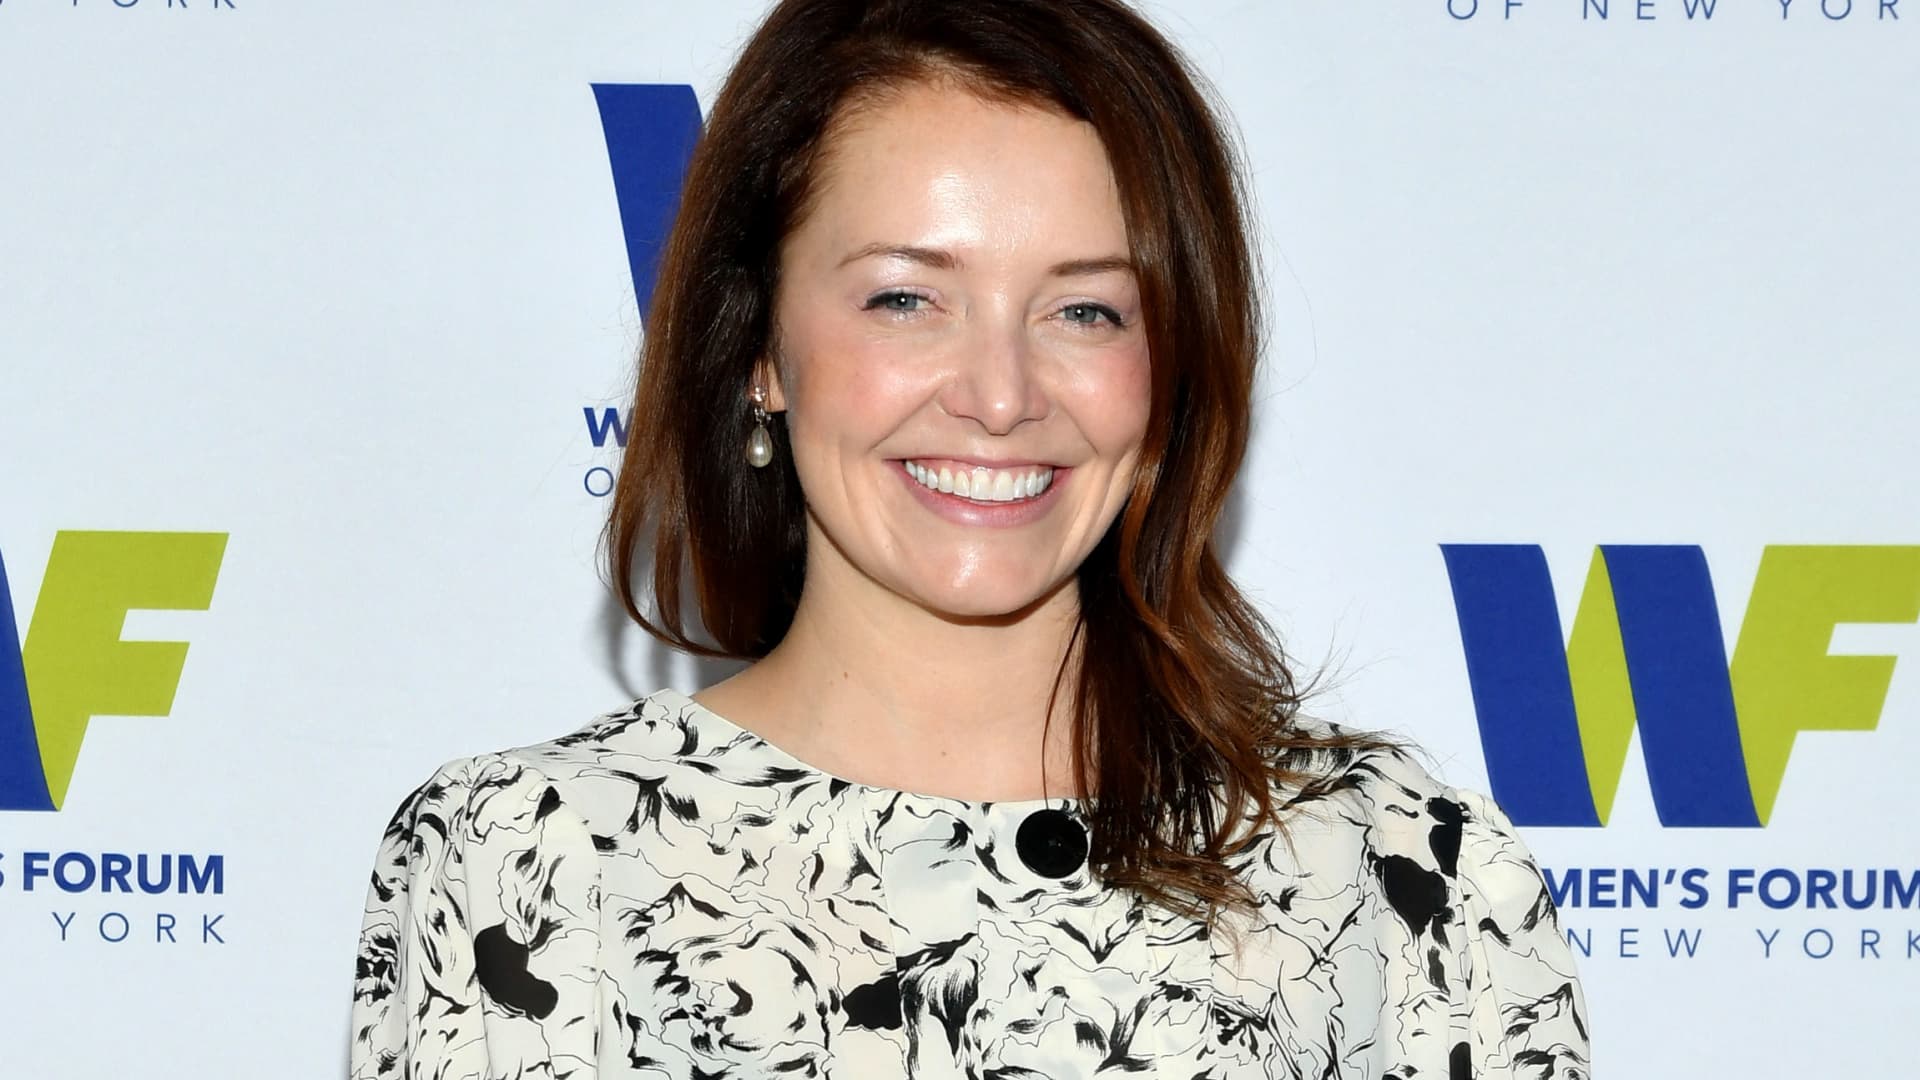 Lindsey Boylan attends The 9th Annual Elly Awards Hosted By The Women's Forum Of New York on June 17, 2019 in New York City.